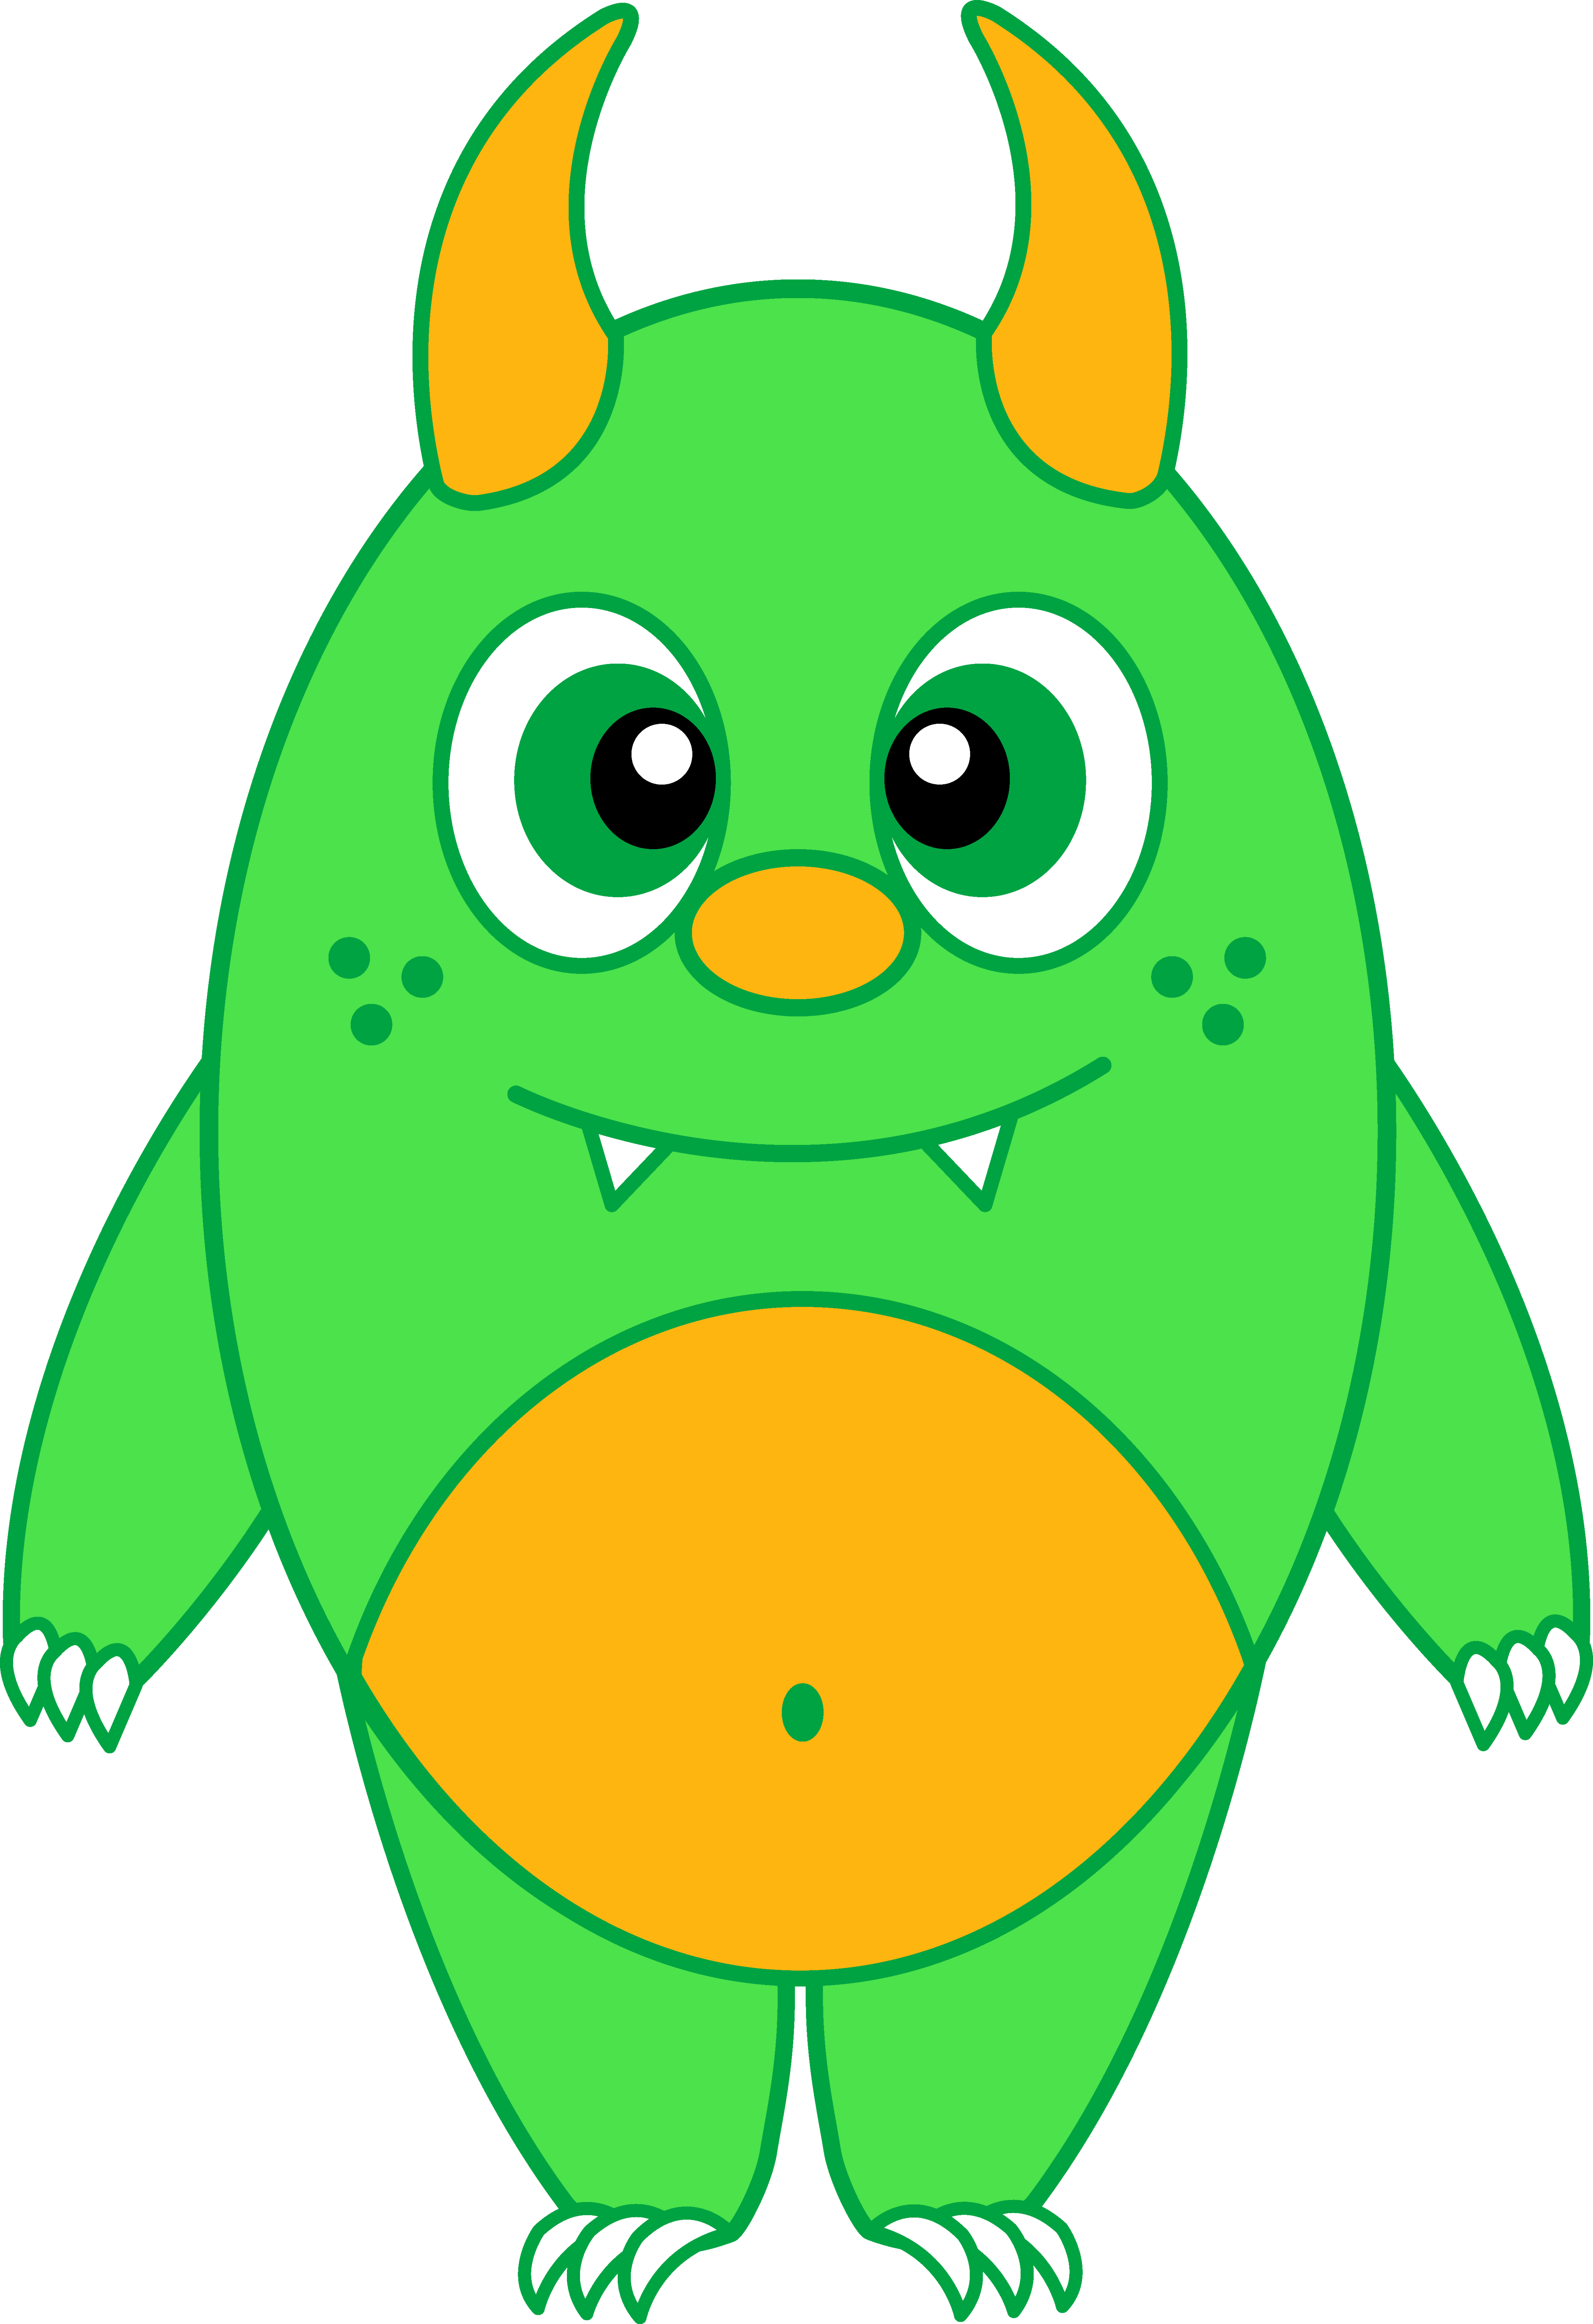 Green Monster Cartoon Clipart - Free to use Clip Art Resource